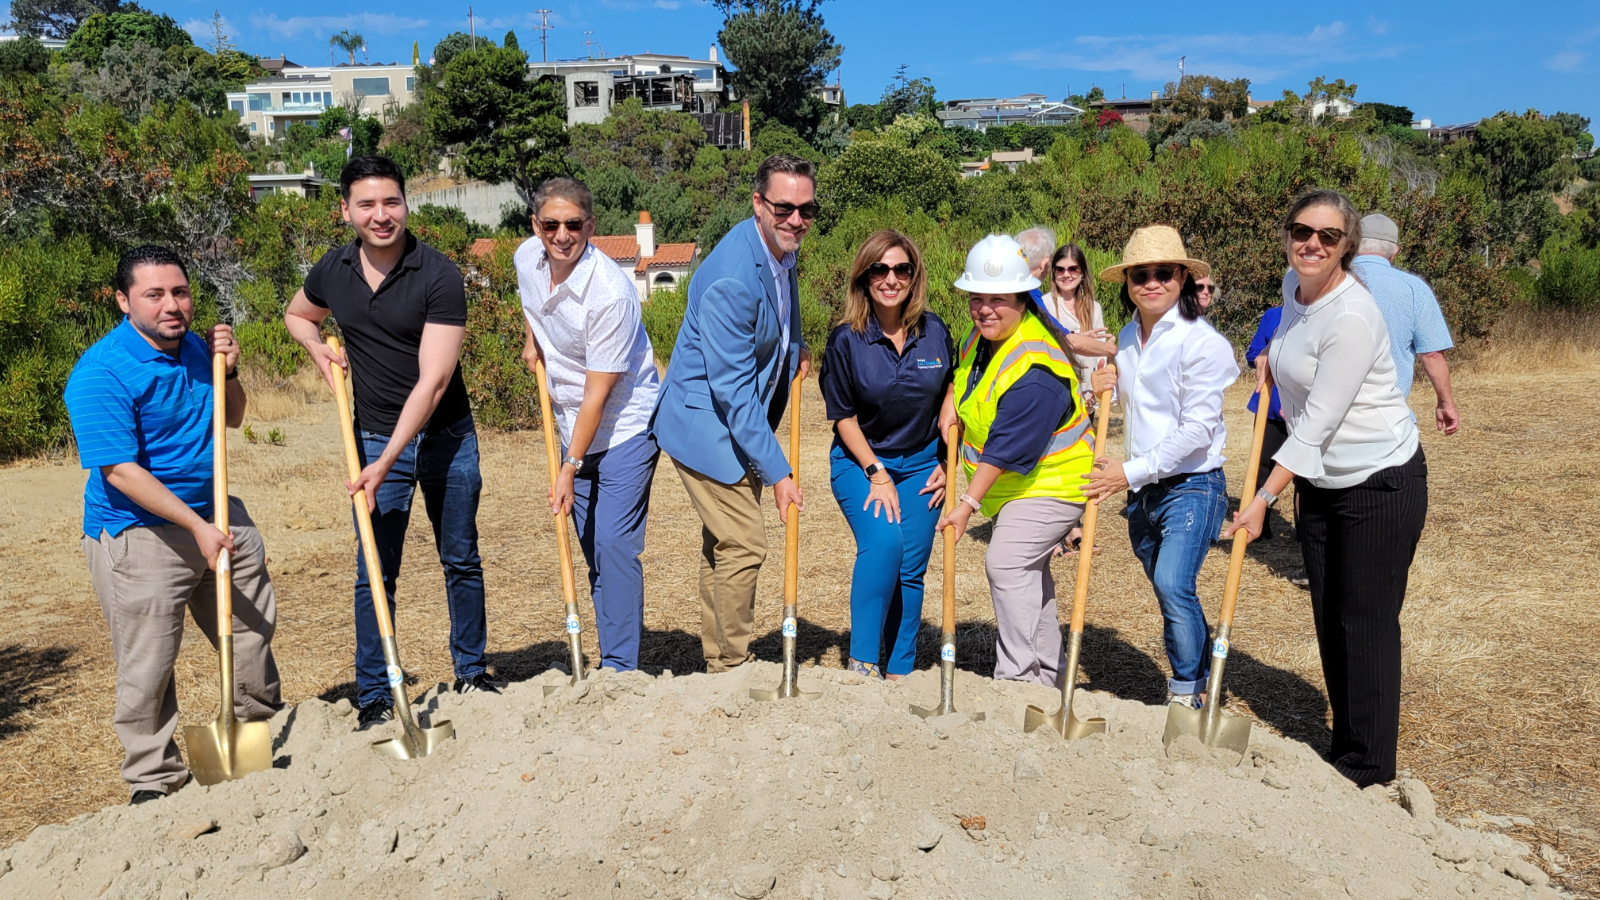 group of people posing with shovels at a groundbreaking event